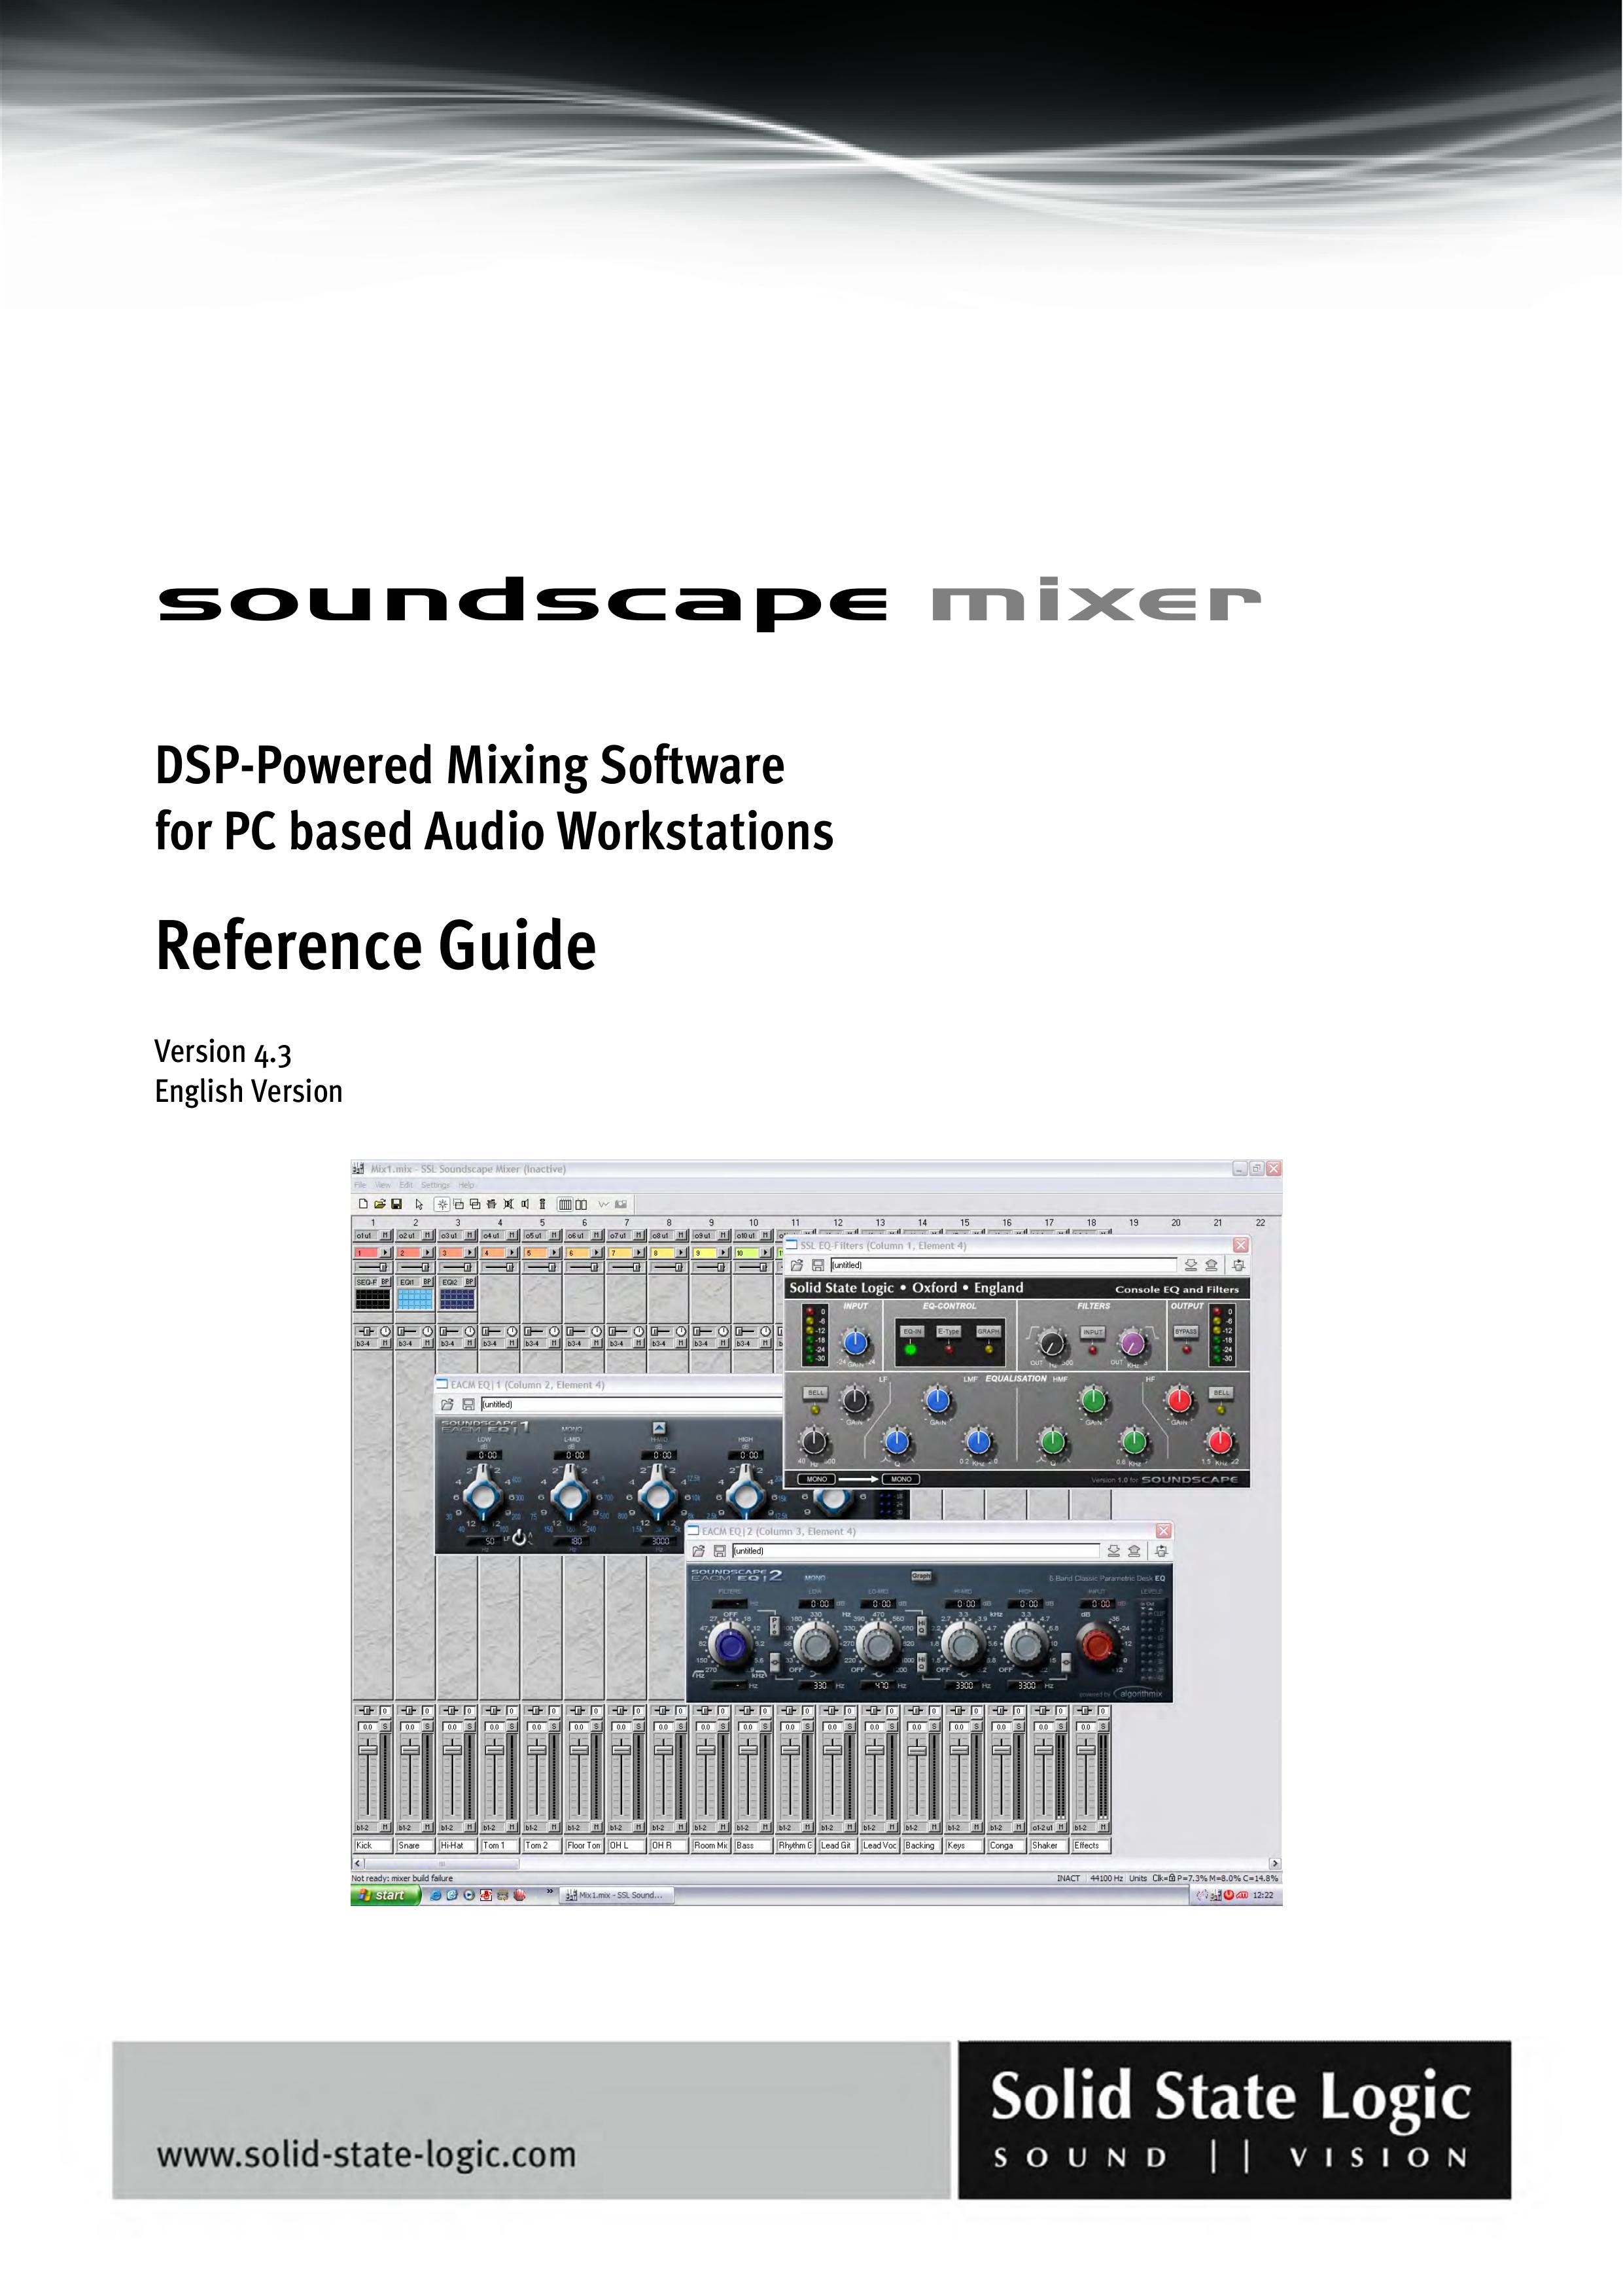 Solid State Logic Soundscape Mixer Music Mixer User Manual